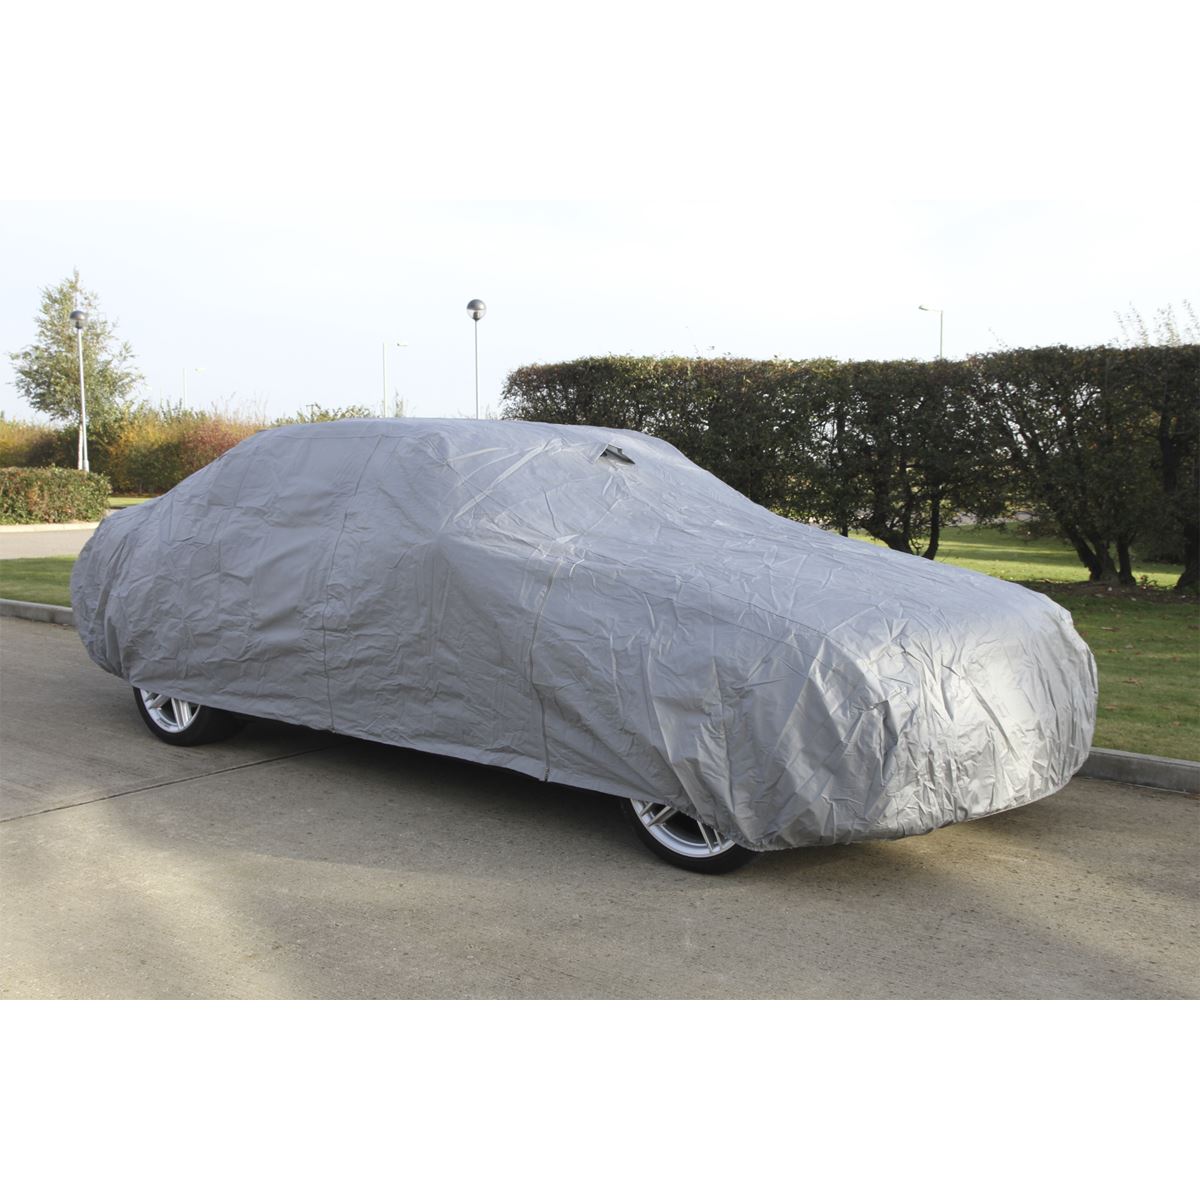 Sealey Car Cover X-Large 4830 x 1780 x 1220mm